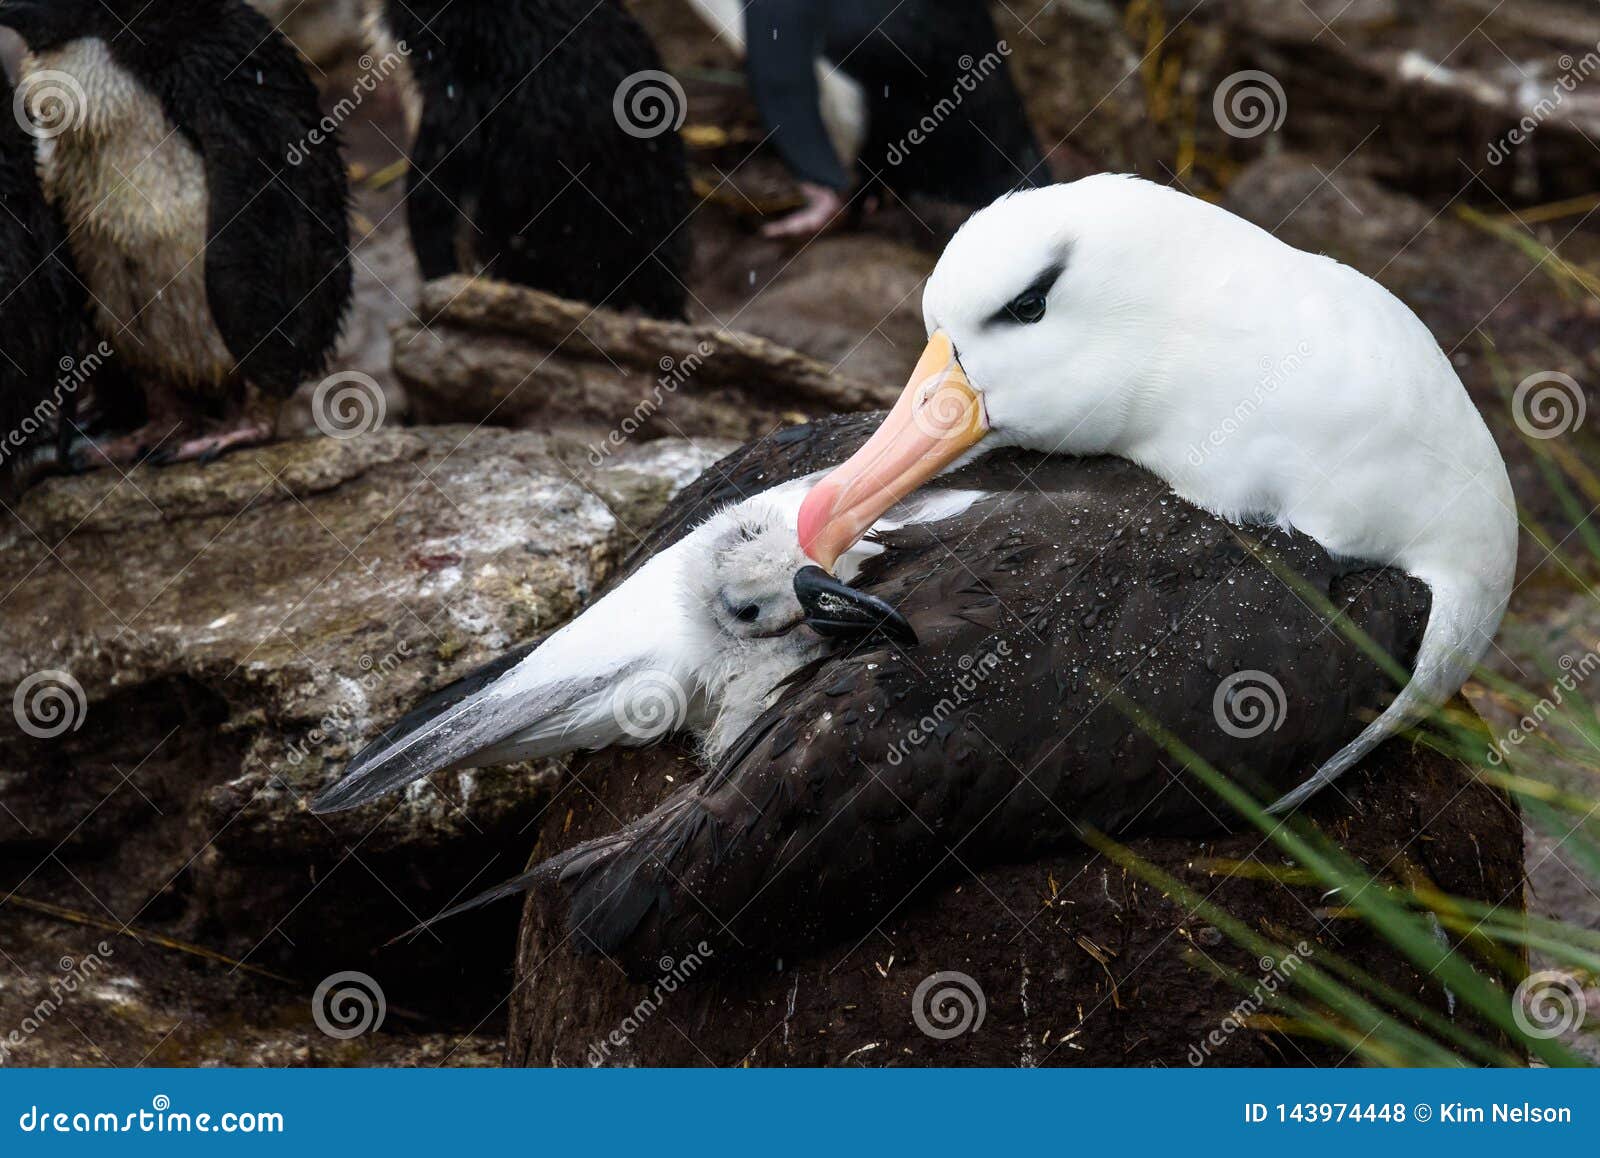 touching moment with black-browed albatross chick under adultÃ¢â¬â¢s wing on mud and grass nest, albatross and penguin rookery, falkl